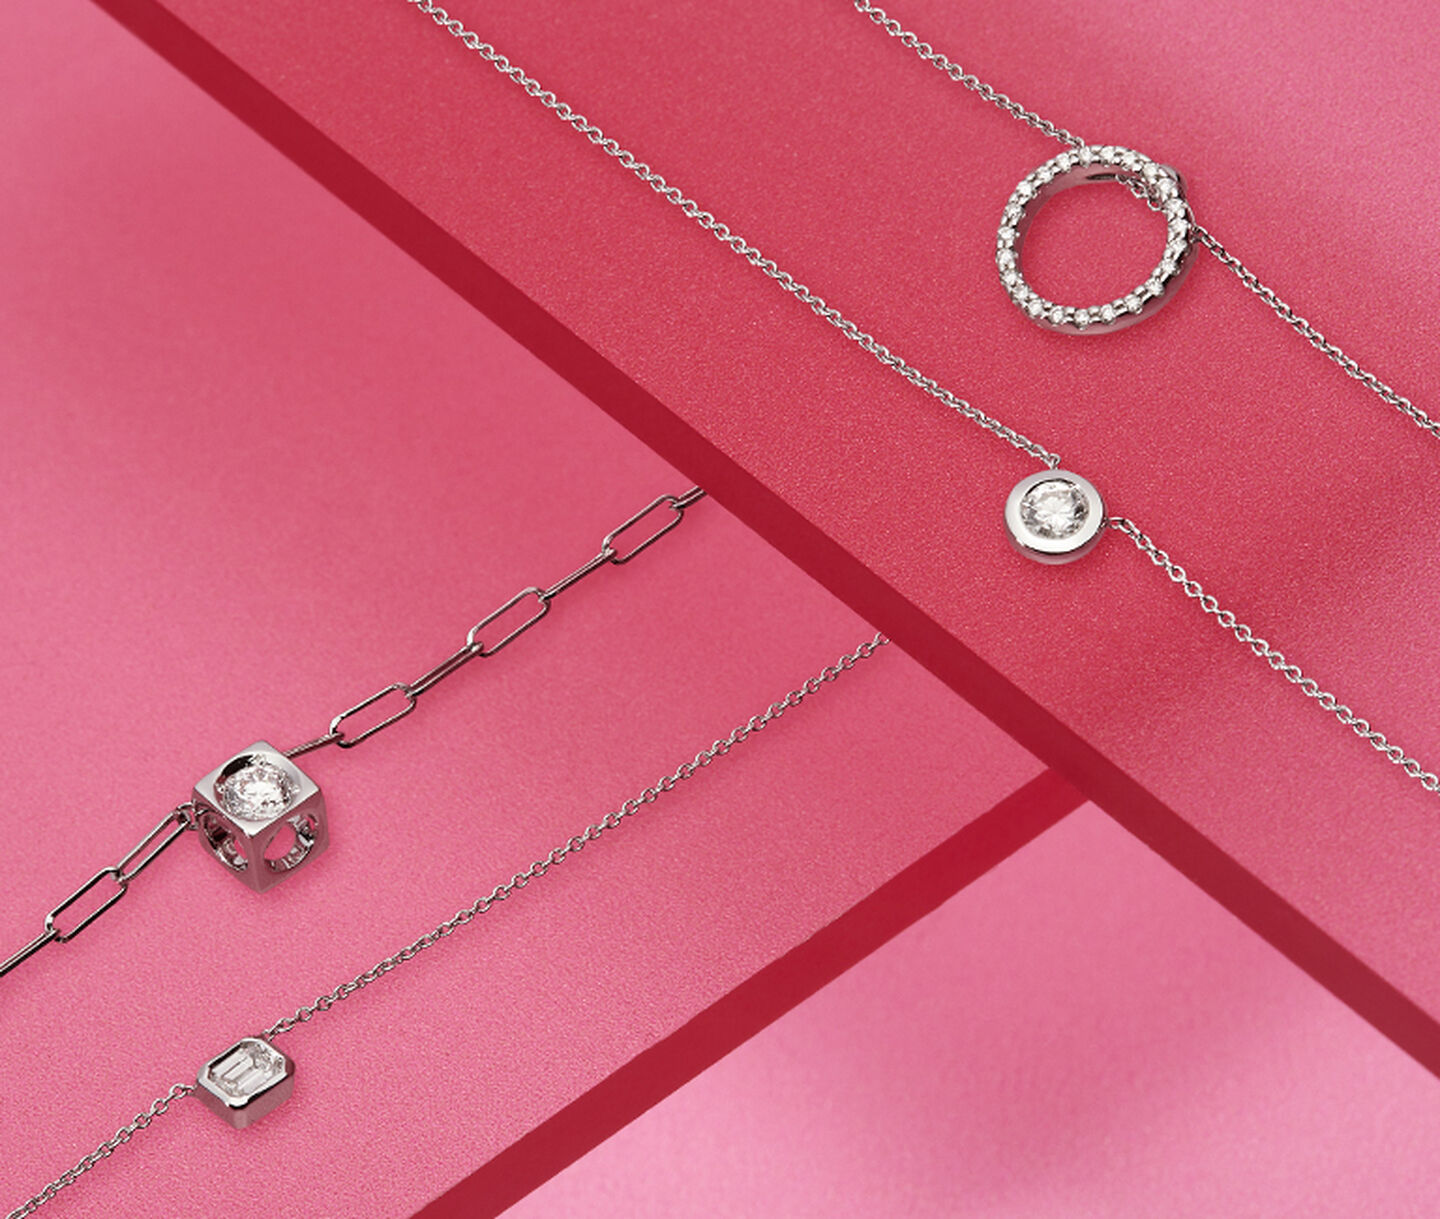 4 silver chains with diamond charms